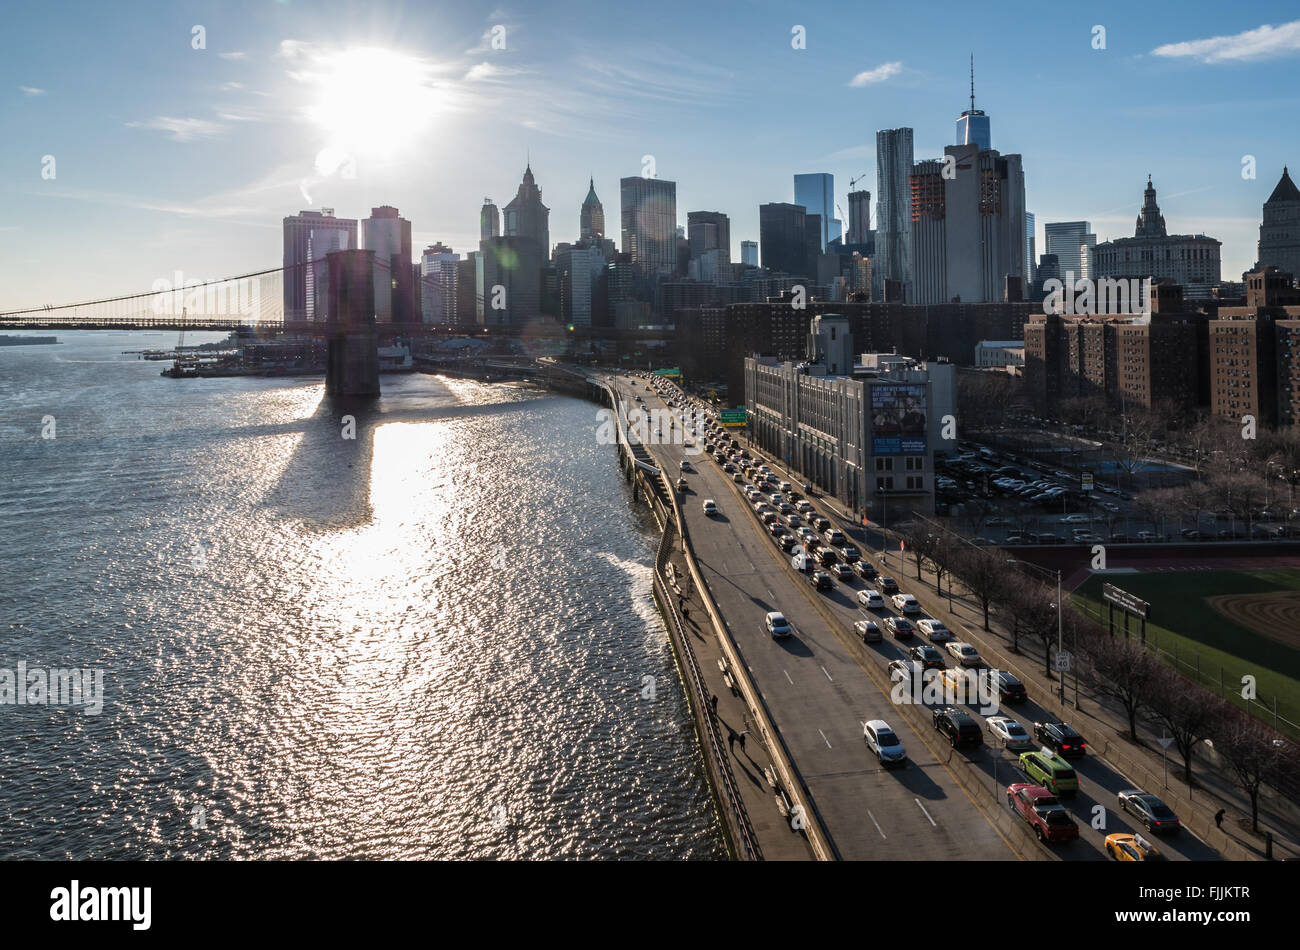 View from above the FDR drive highway in New York City with the Brooklyn Bridge, East River and downtown Manhattan skyline Stock Photo